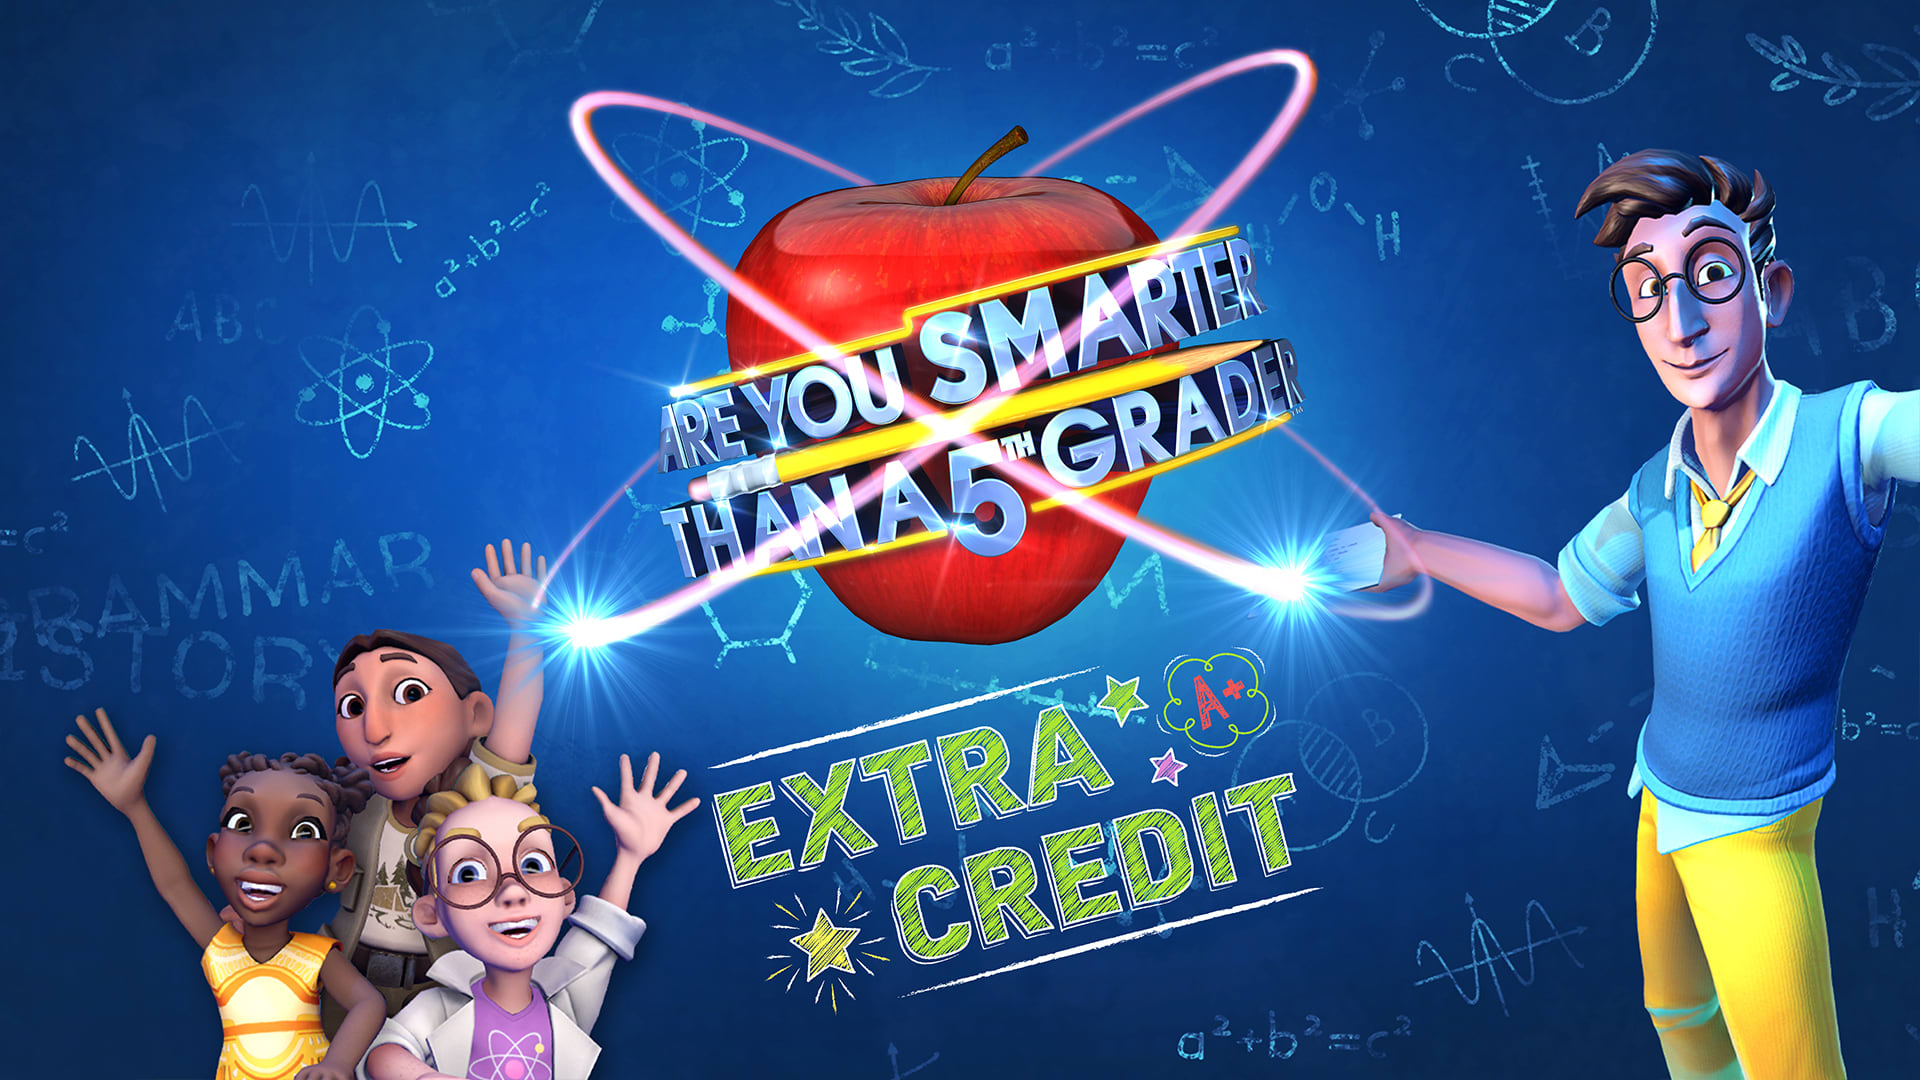 Are You Smarter than a 5th Grader? - Extra Credit